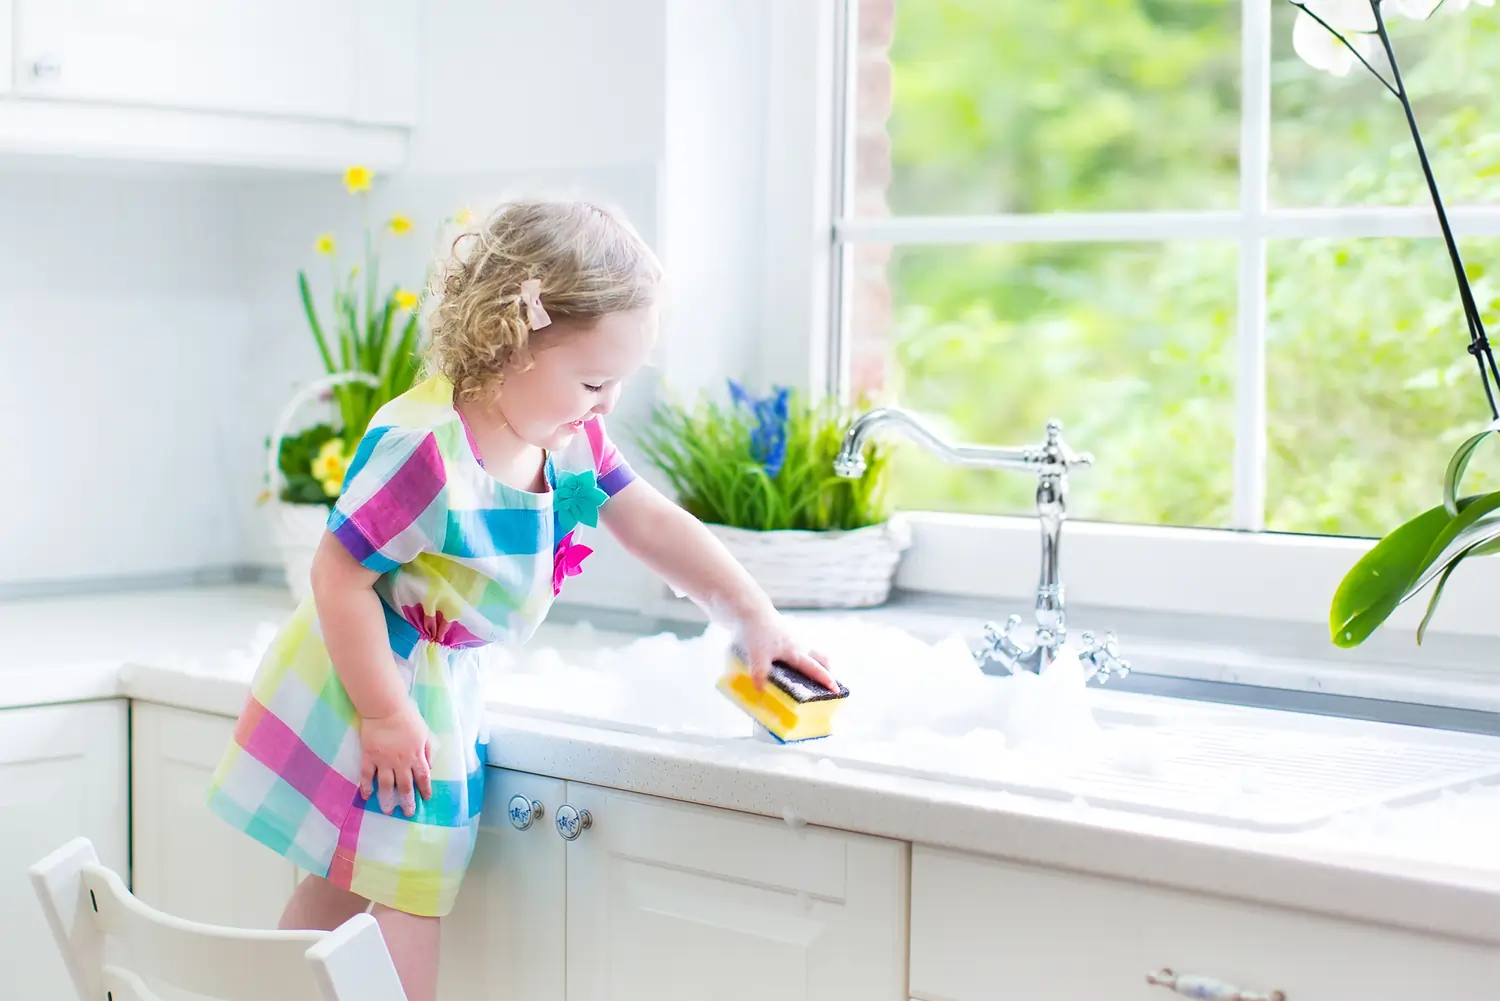 Little Girl washing dishes without gloves with safe toxicfree products